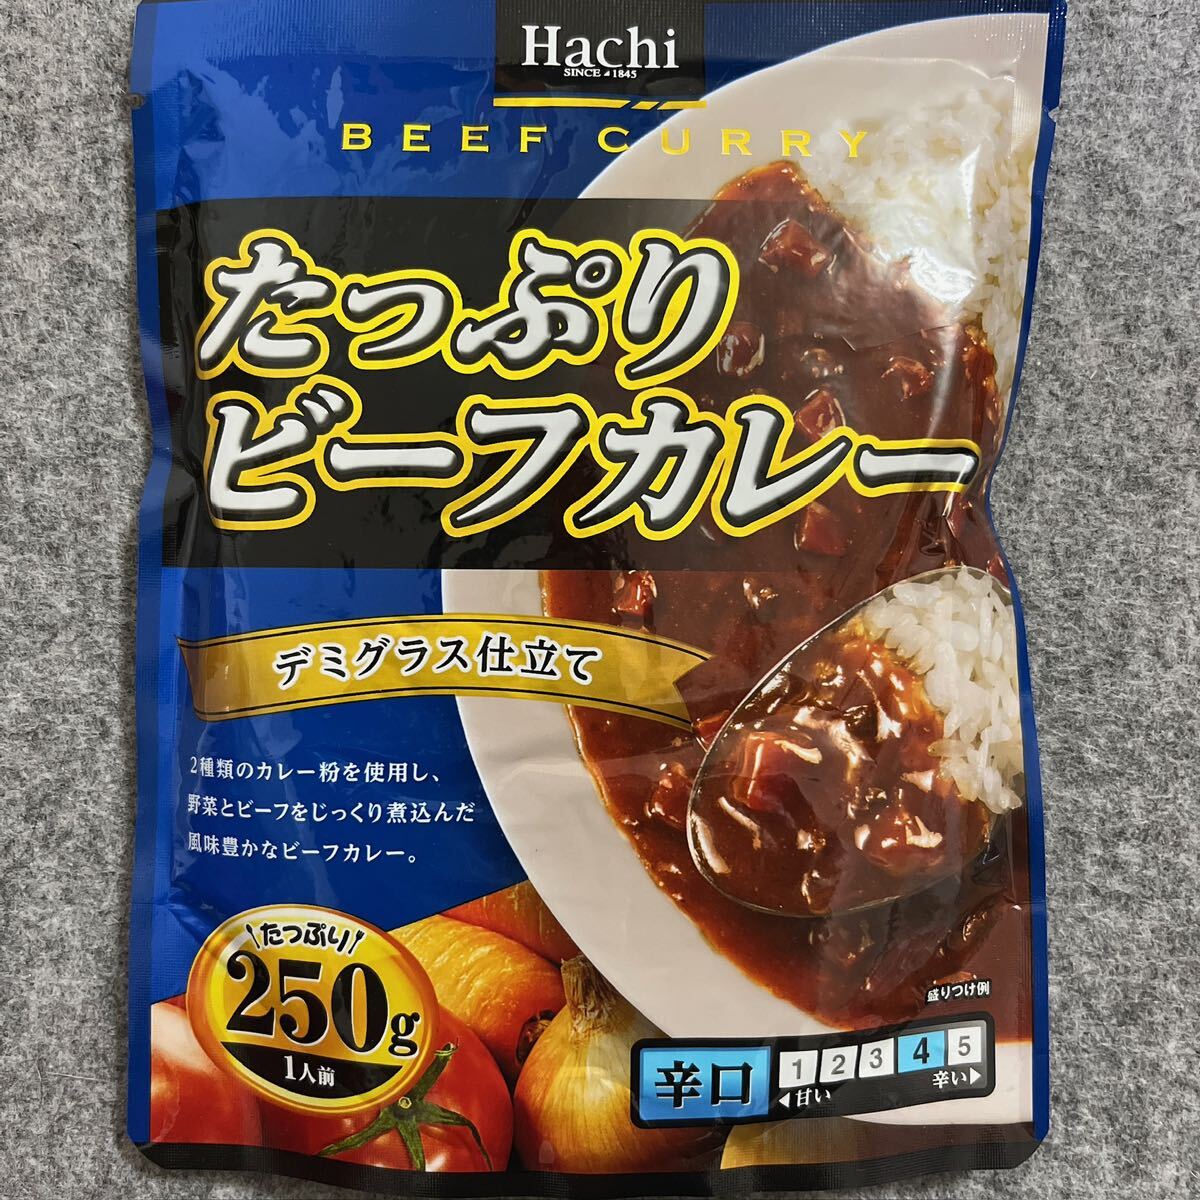  bee food enough beef curry (..)250g×5 sack retortable pouch set sale 